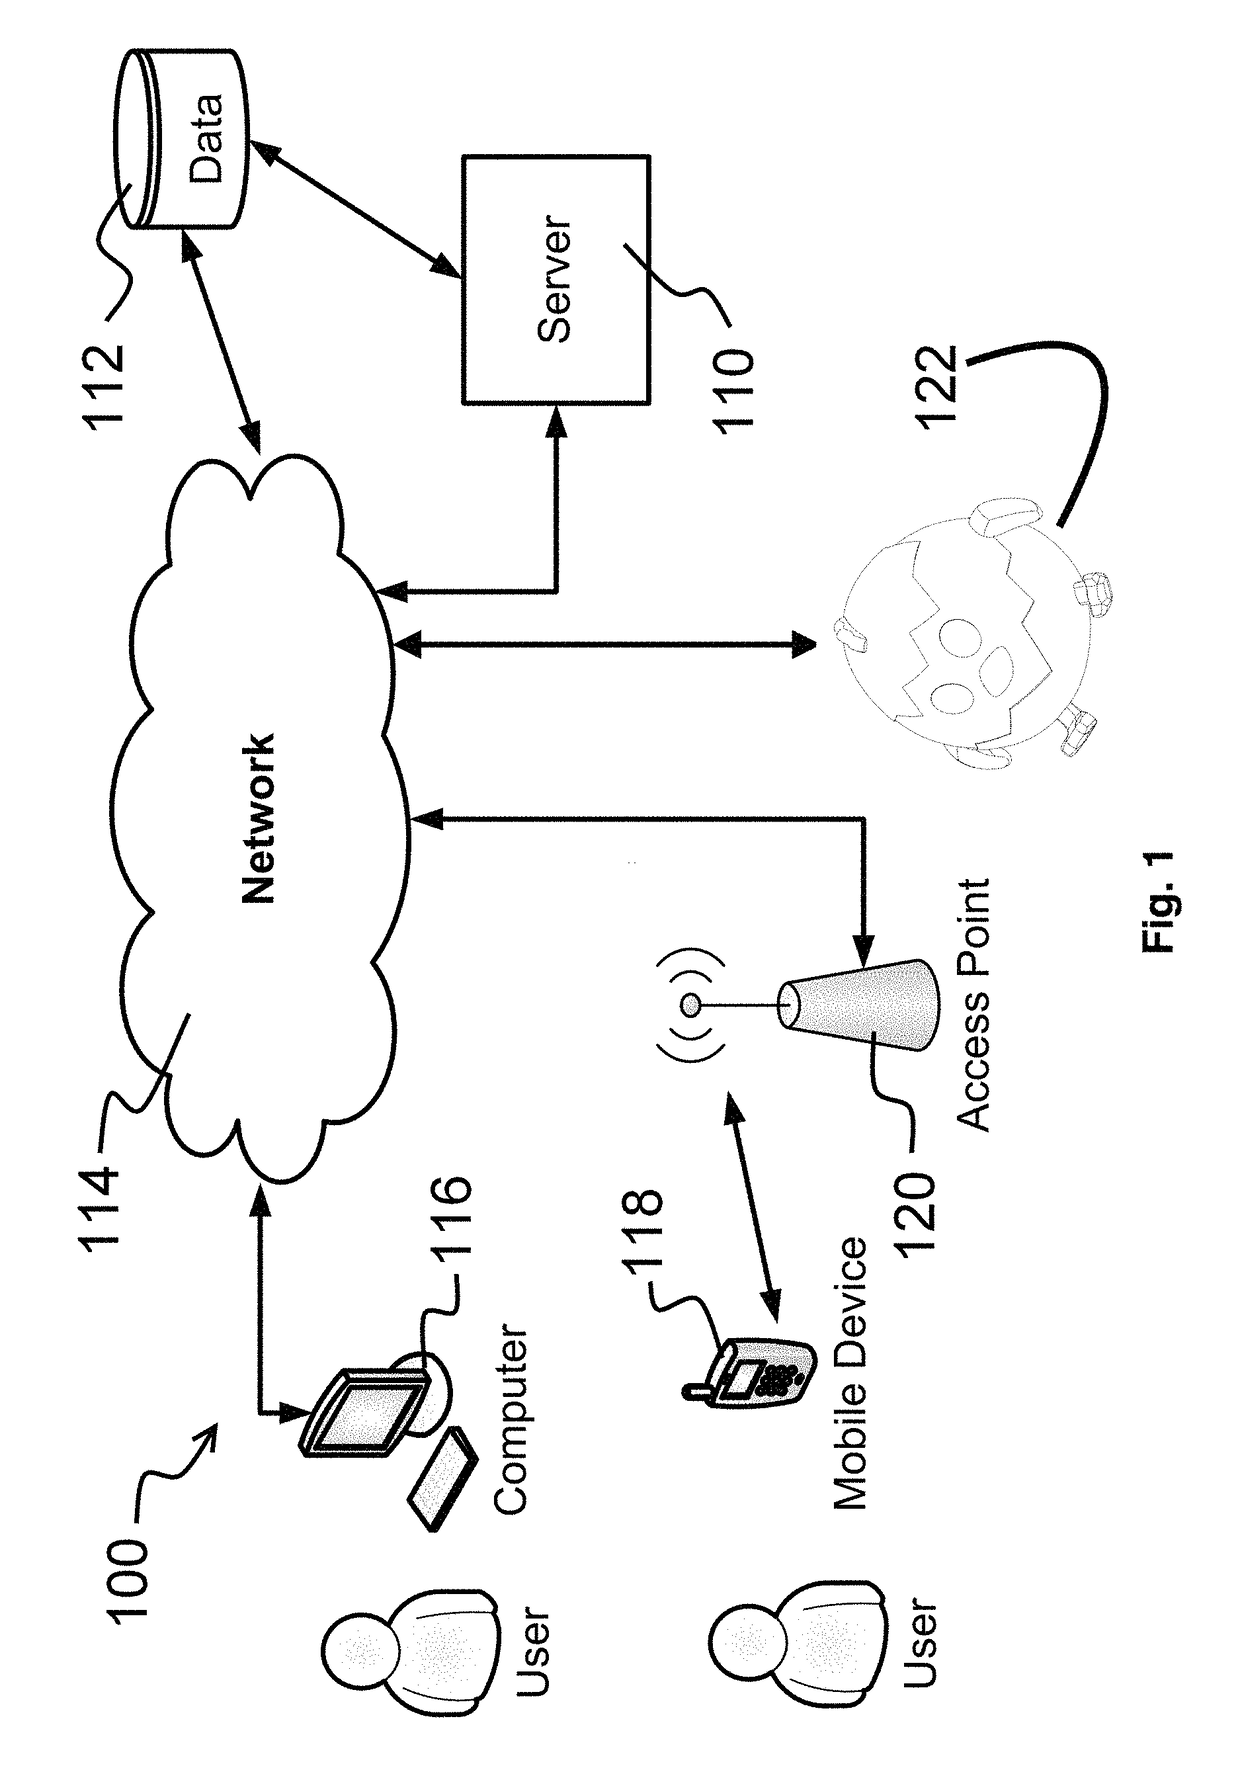 Throw-and-catch based toy with free fall sensing, impact sensing, and speaker output